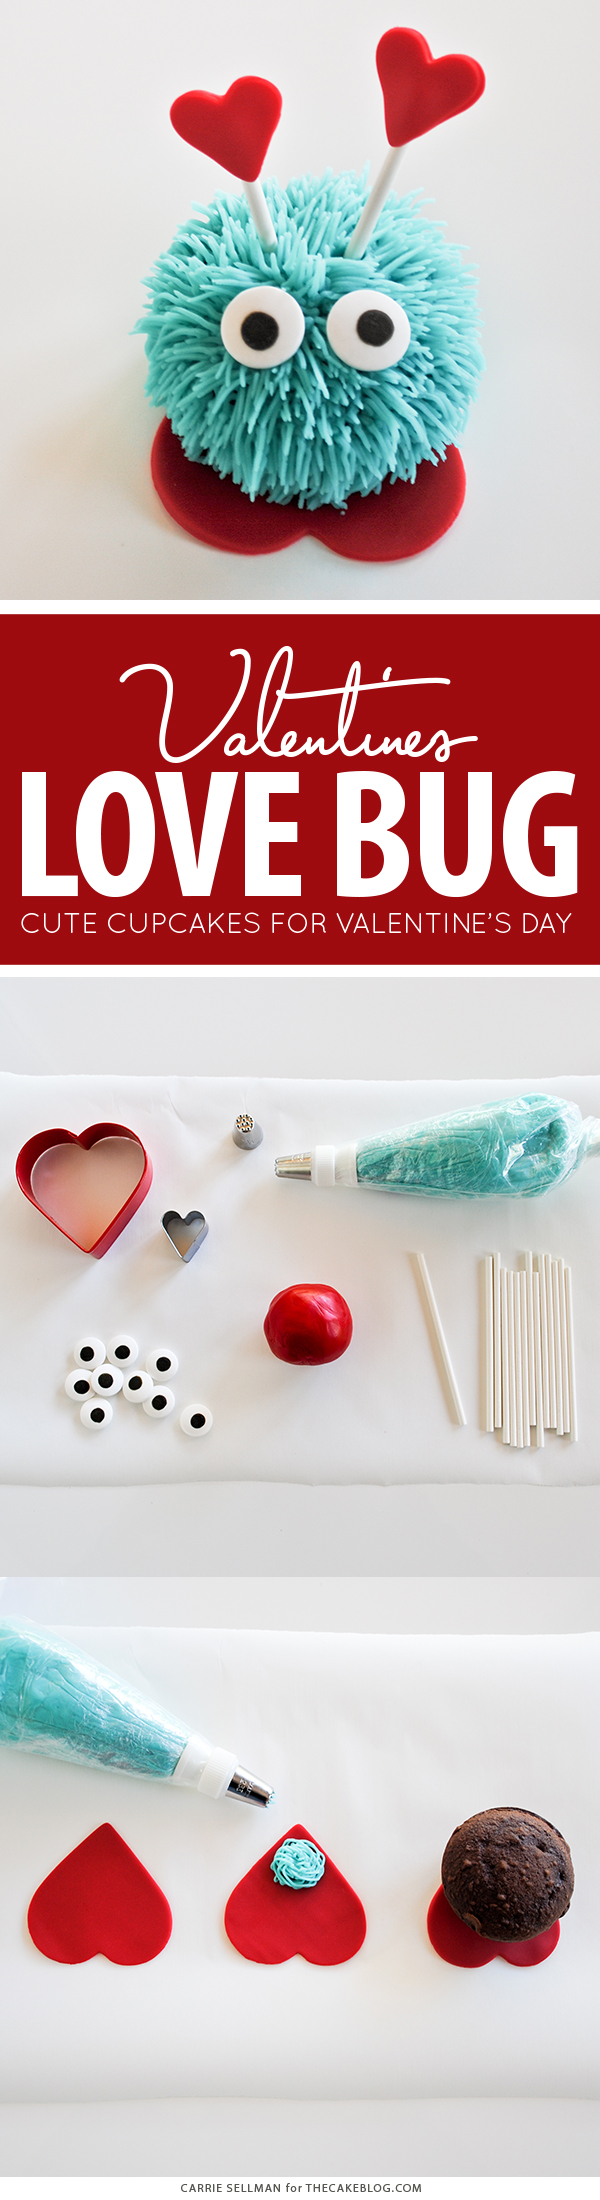 Love Bug Cupcakes - a fun Valentines Day dessert for kids | by Carrie Sellman for TheCakeBlog.com